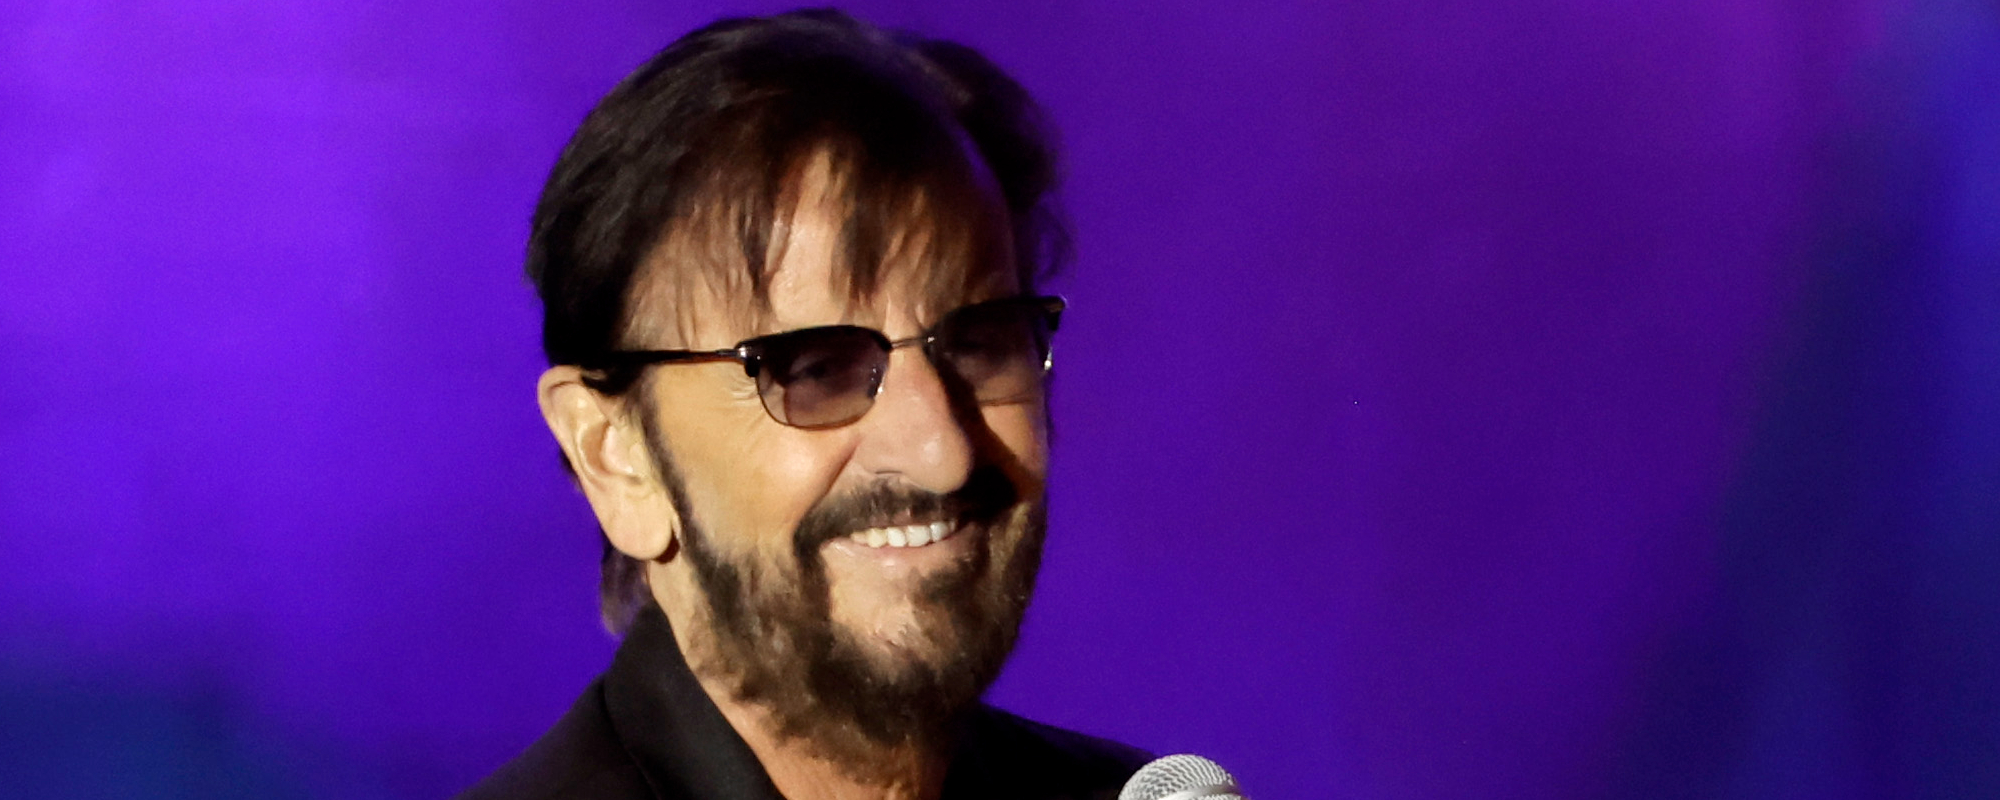 Ringo Starr Recalls “Downer Incident” That Seemed To Encompass Beatles Film ‘Let It Be’